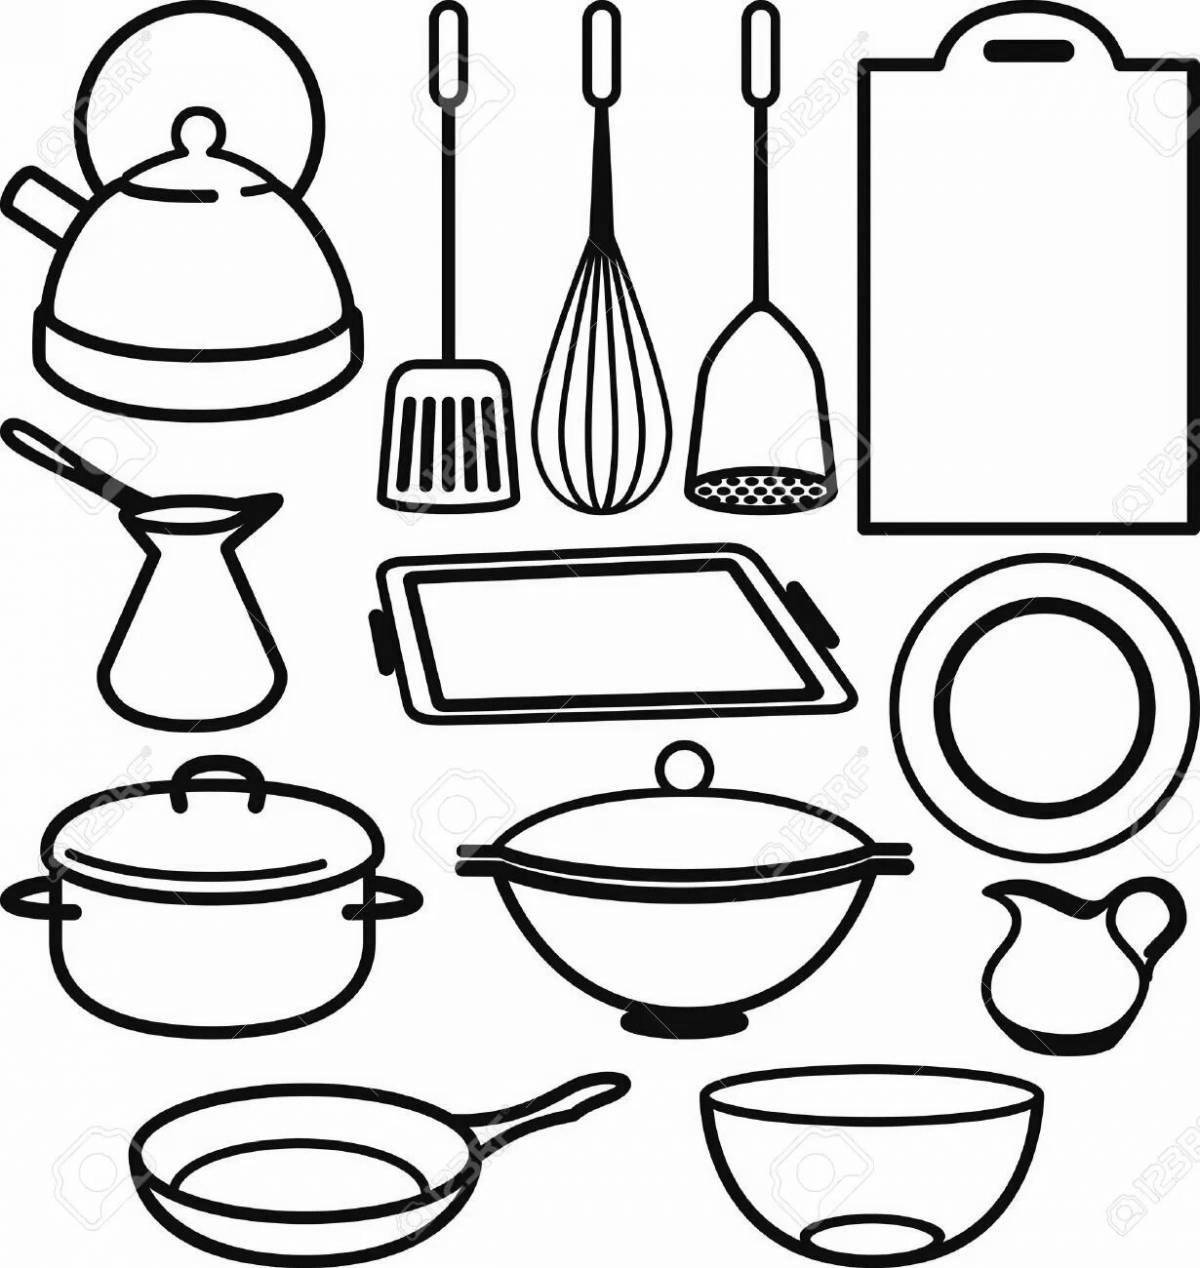 Animated tableware coloring page